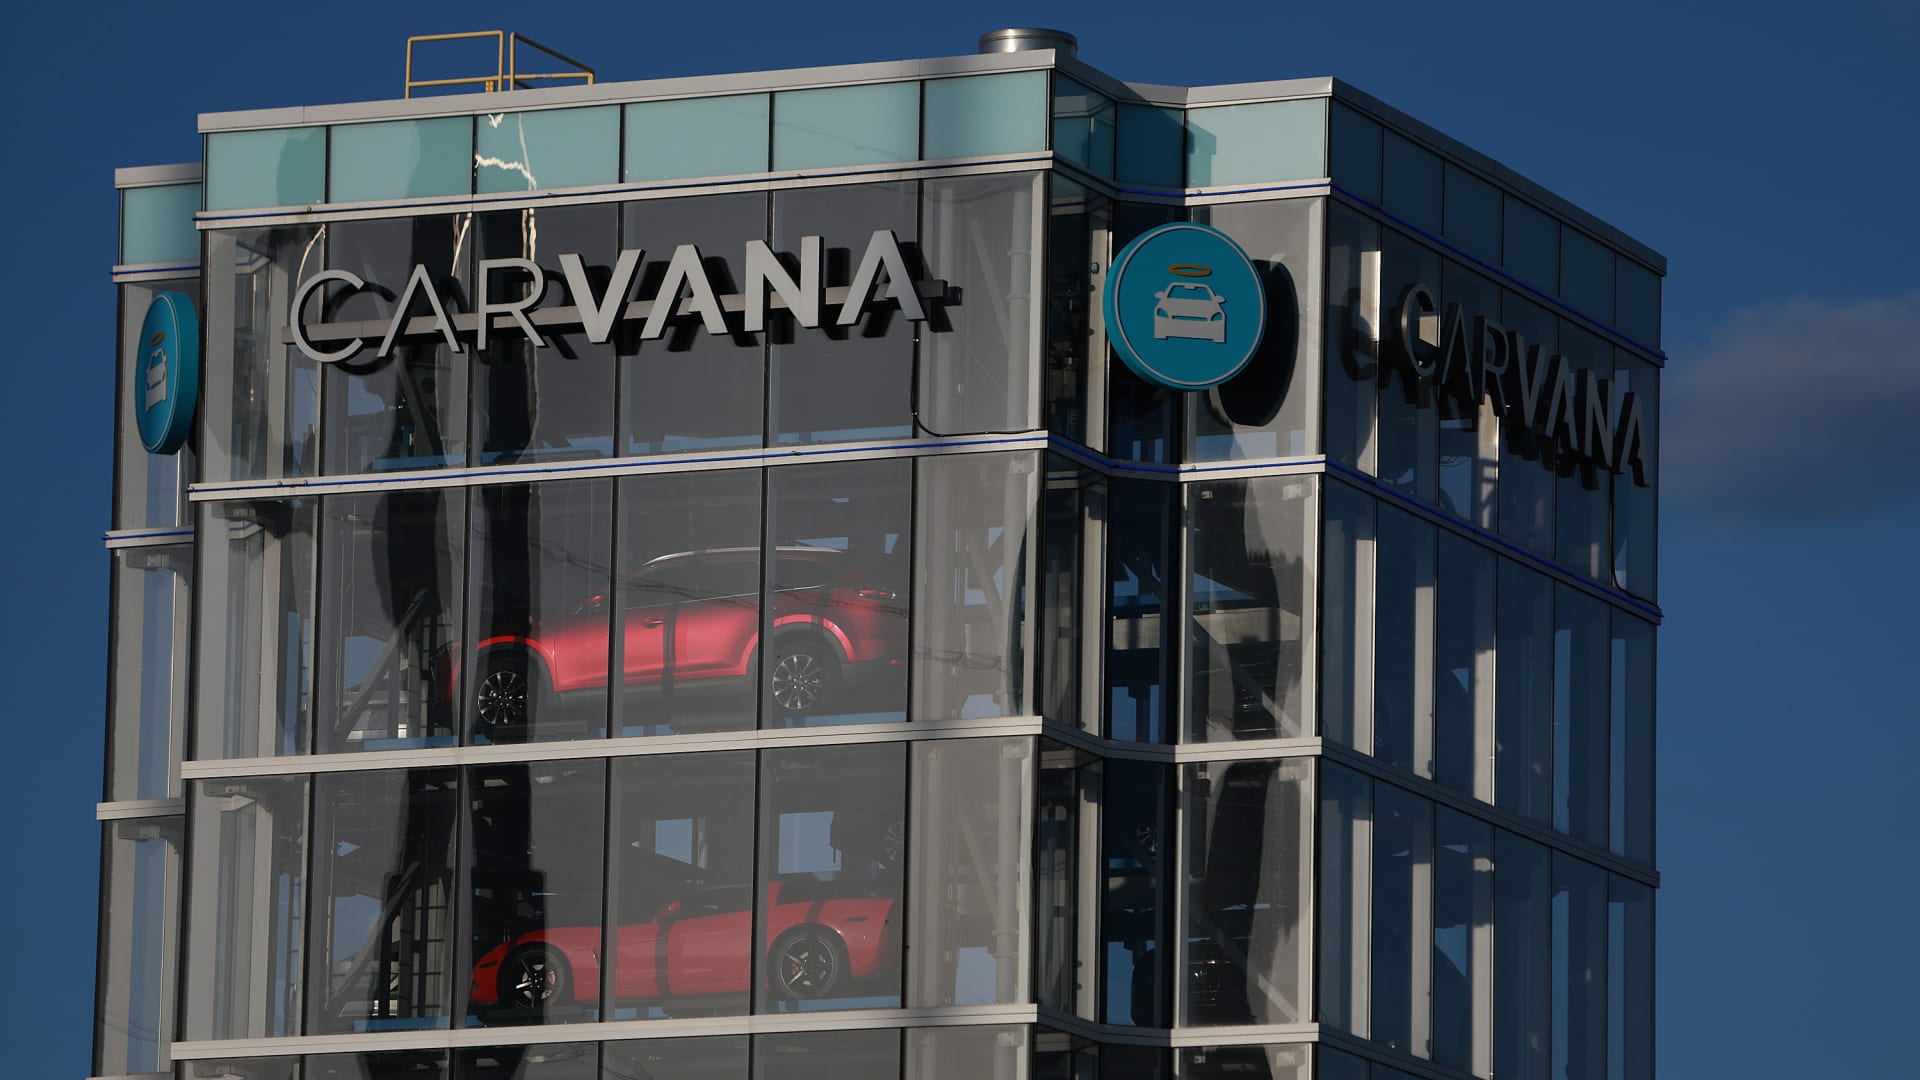 Carvana to lay off 1,500 employees following stock freefall